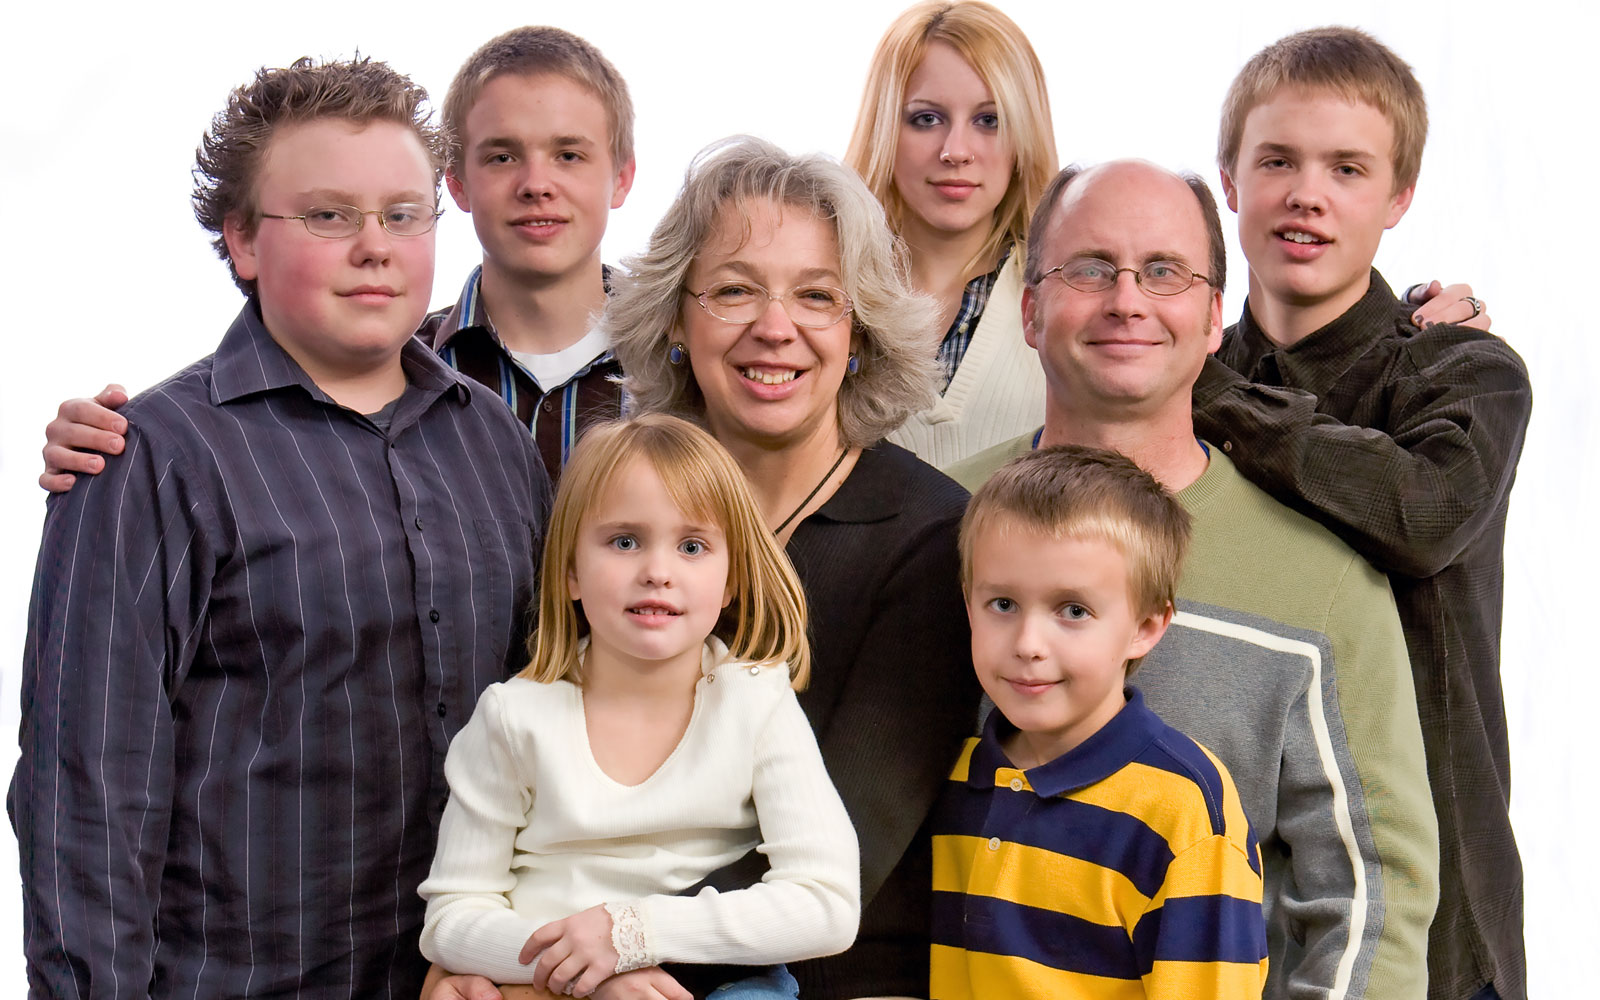 Big family of eight with 2 girls and 4 boys